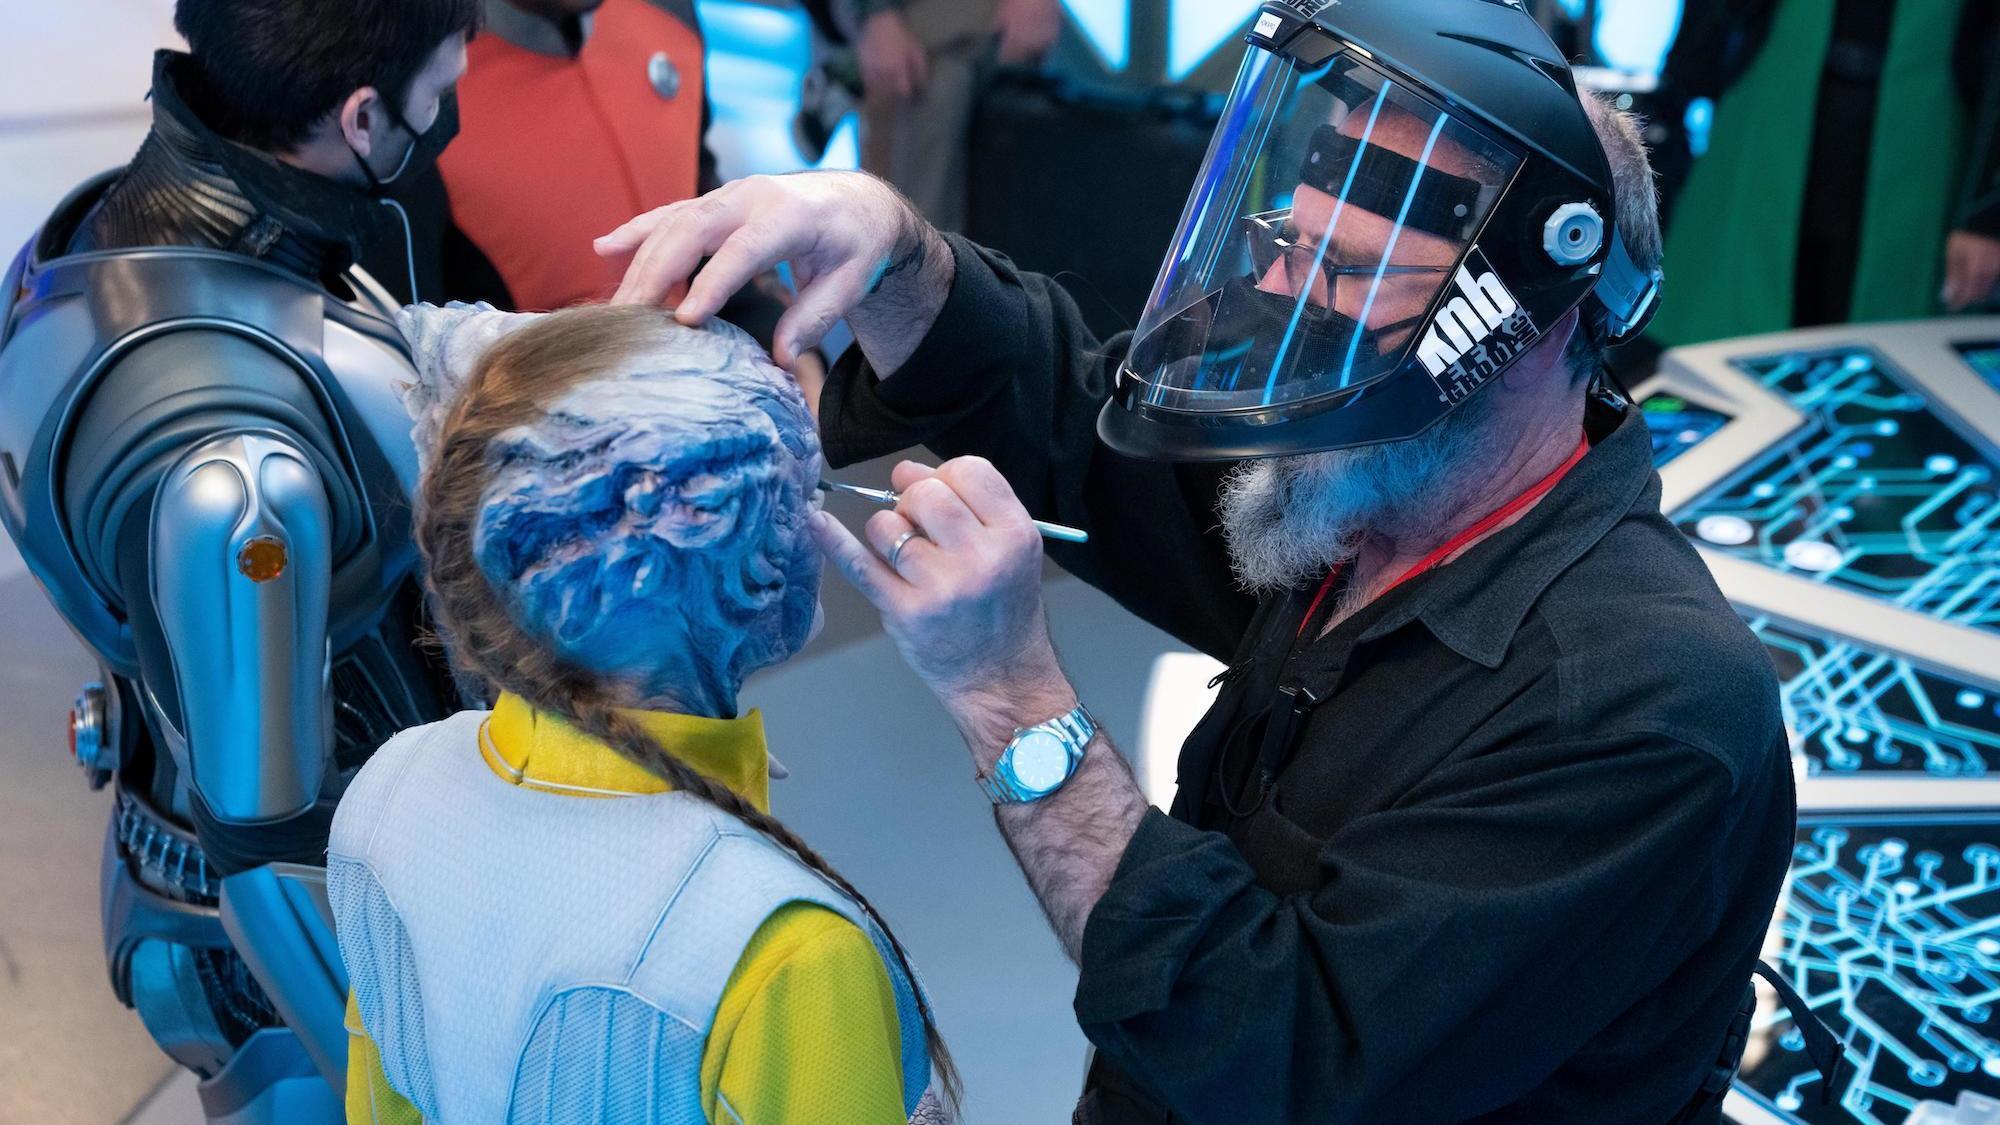 The Orville: New Horizons -- “From Unknown Graves” - Episode 307 -- The Orville discovers a Kaylon with a very special ability. Makeup Artist Howard Berger, shown. (Photo by: Greg Gayne/Hulu)